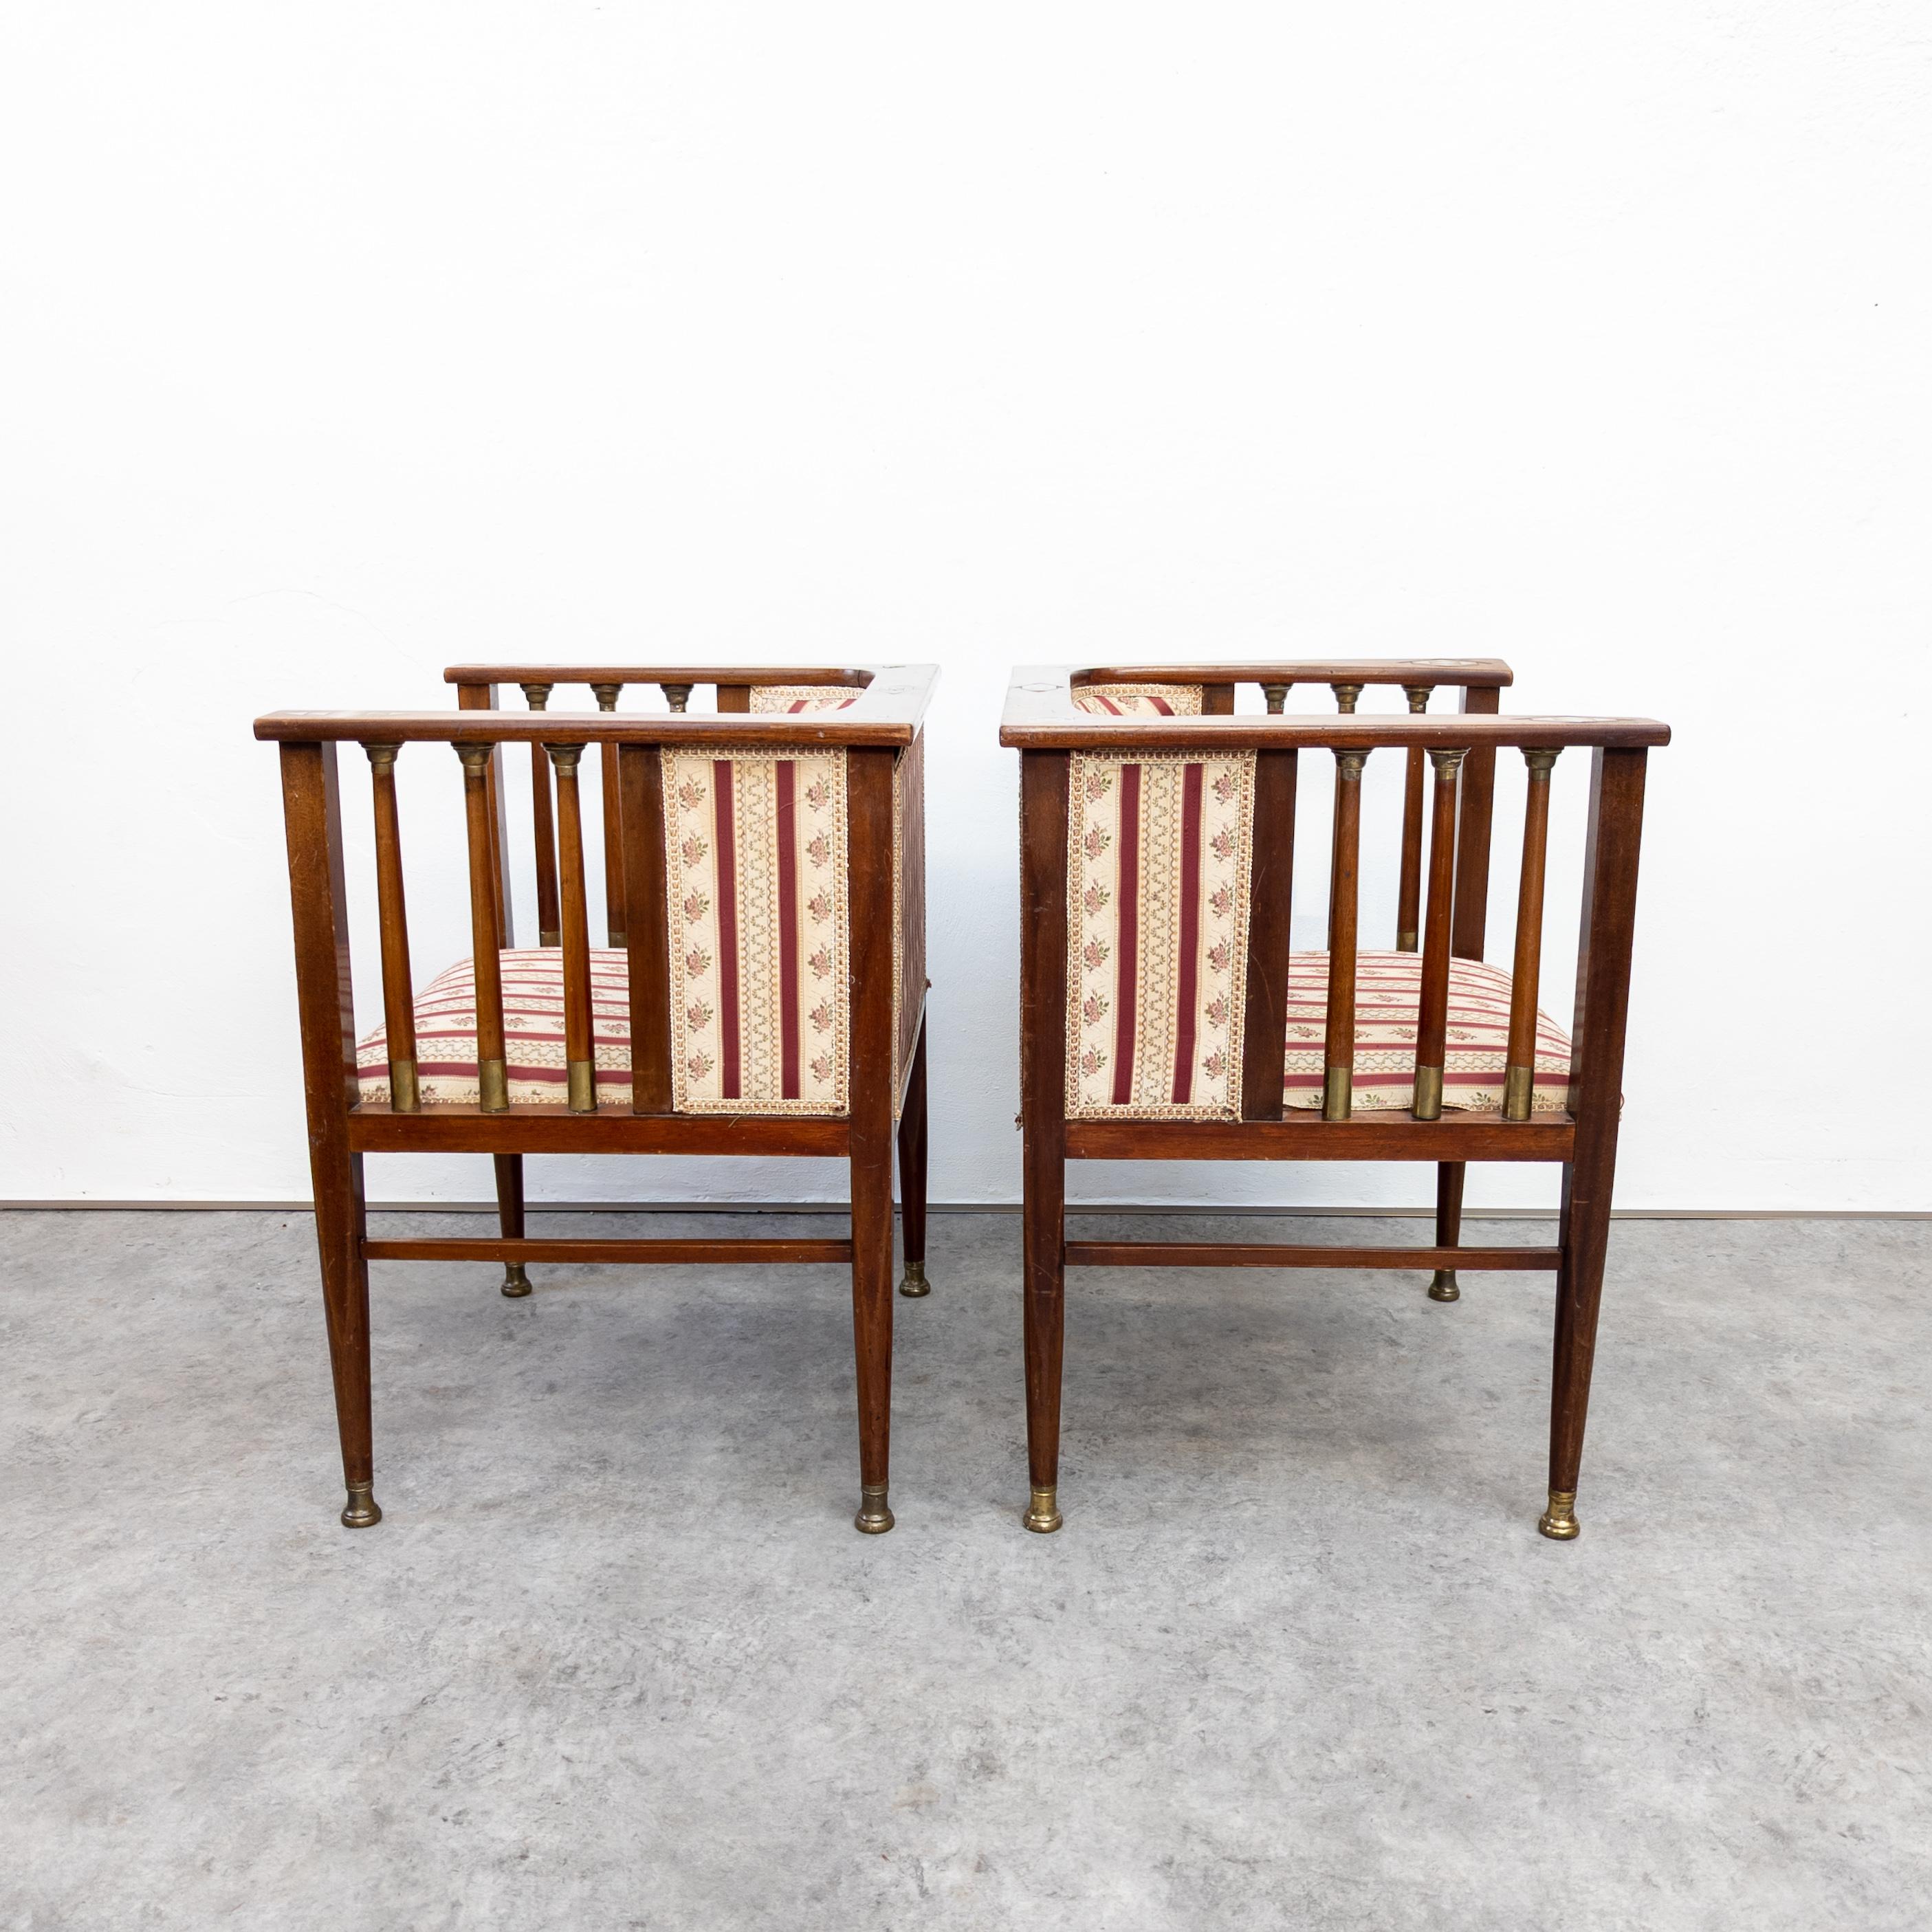 Early 20th Century Art Nouveau Mahogany and Brass Armchairs by Hans Christiansen For Sale